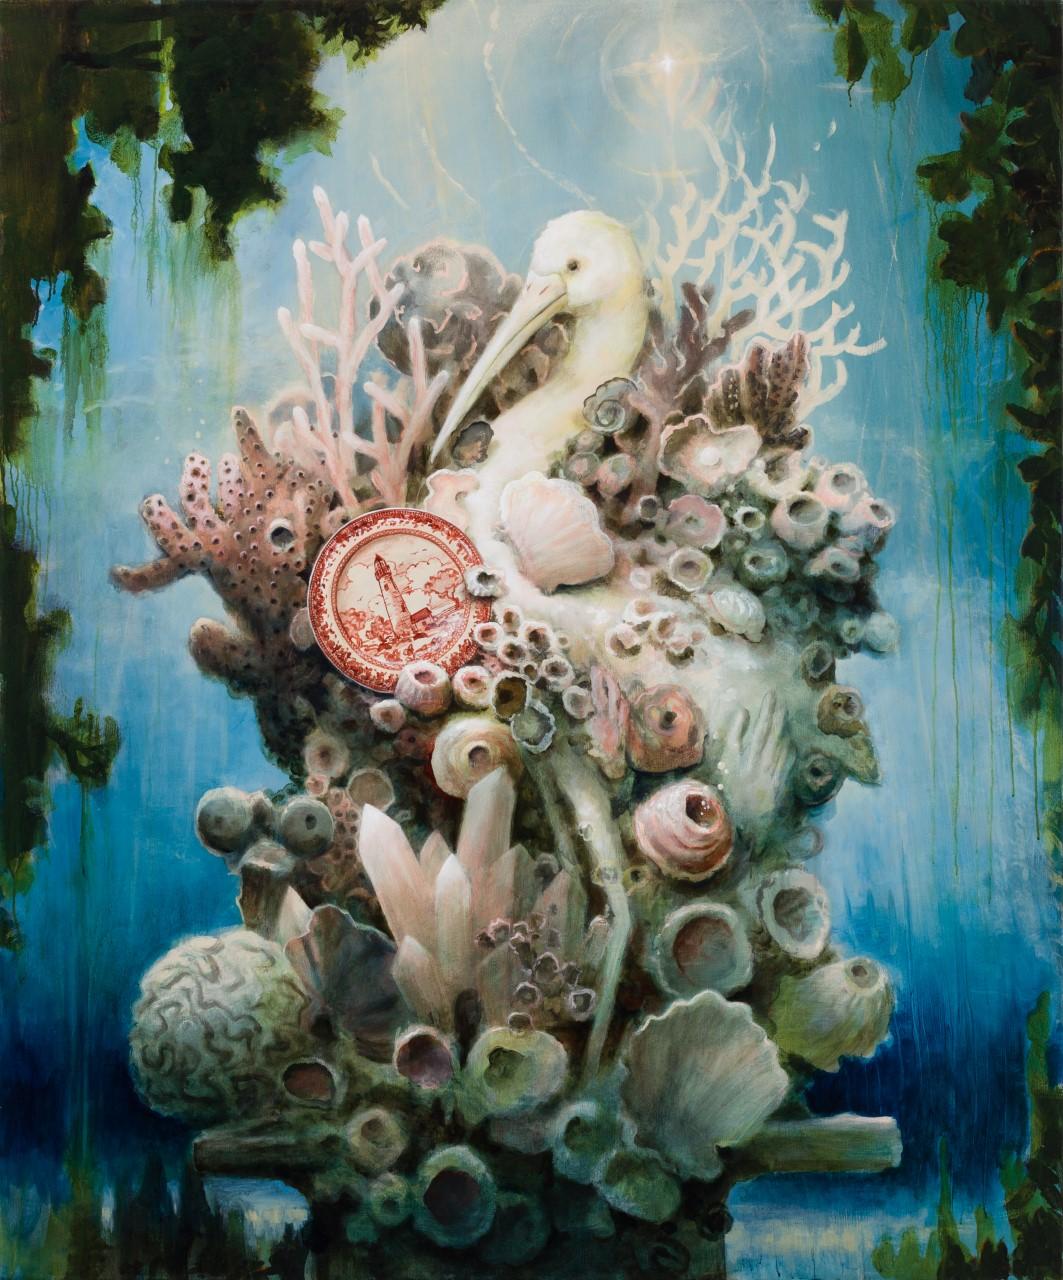 A Sculpture at the Bottom of the Sea - Painting by Kevin Sloan